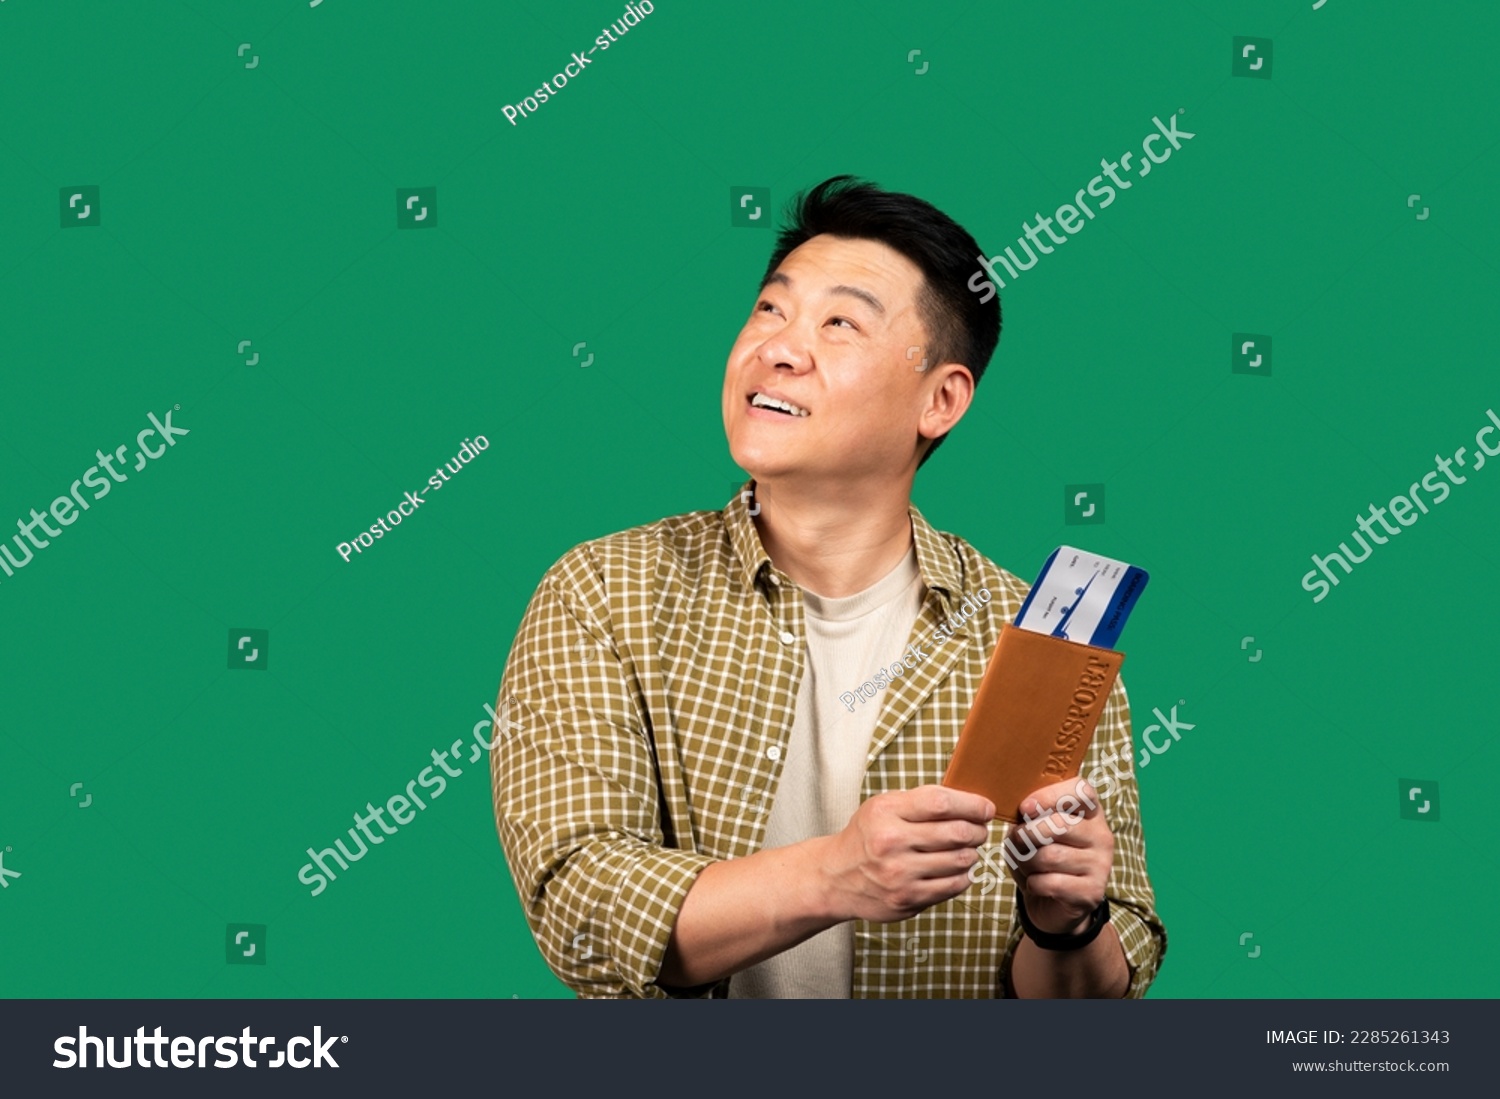 Portrait of asian middle aged man holding passport with plane boarding pass tickets, looking aside at copy space on green studio background. Overseas tourism, abroad vacation concept #2285261343